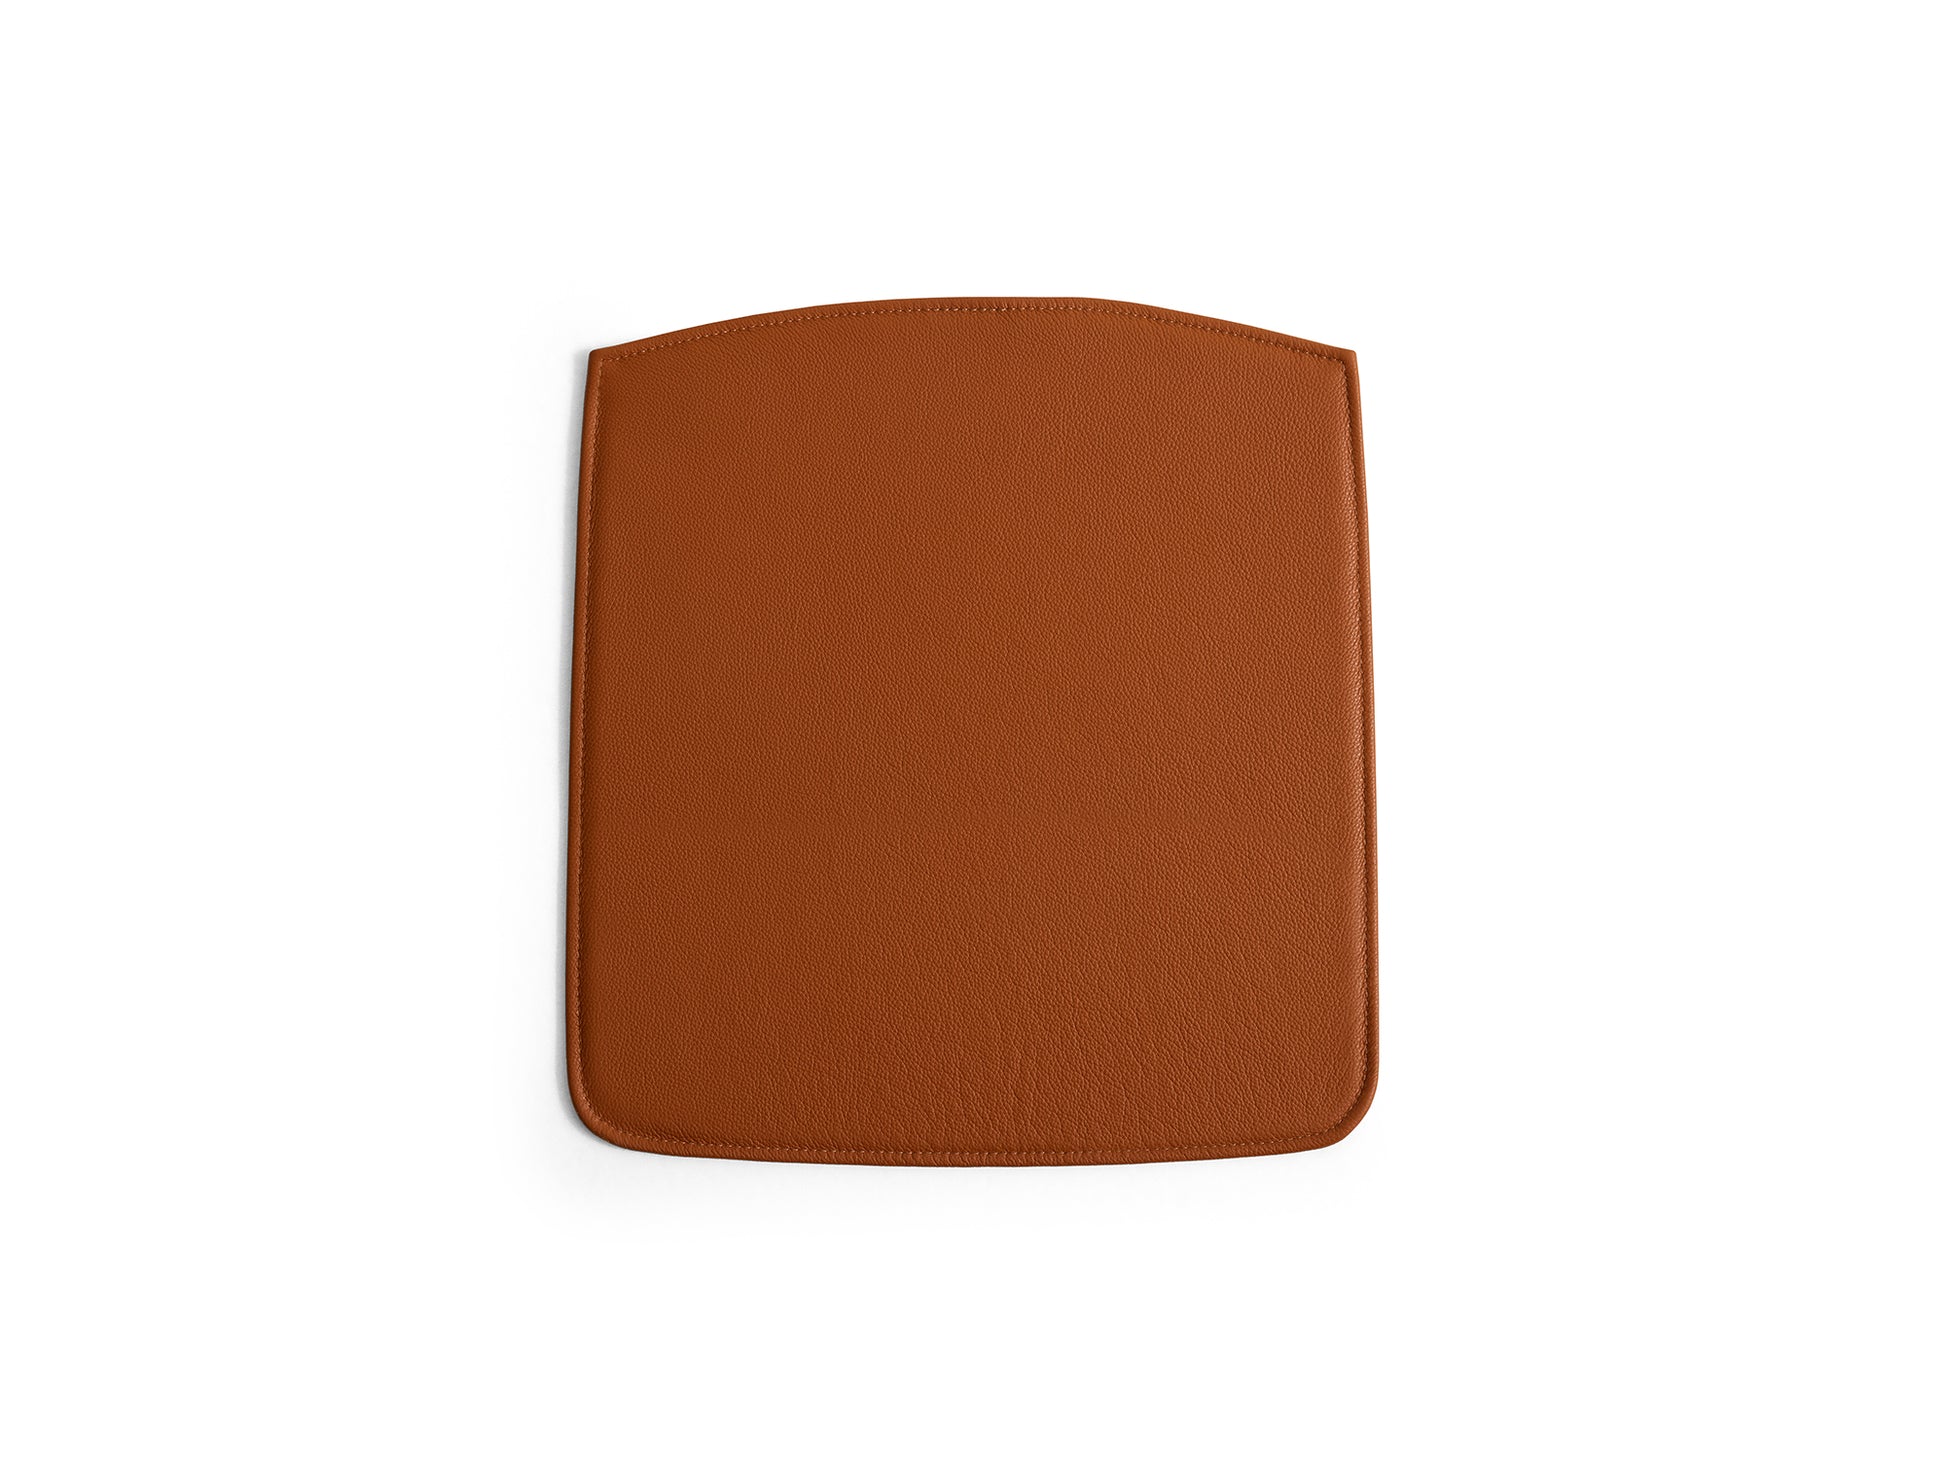 Pastis Chair Seat Pads by HAY - Cognac  Scozia Leather